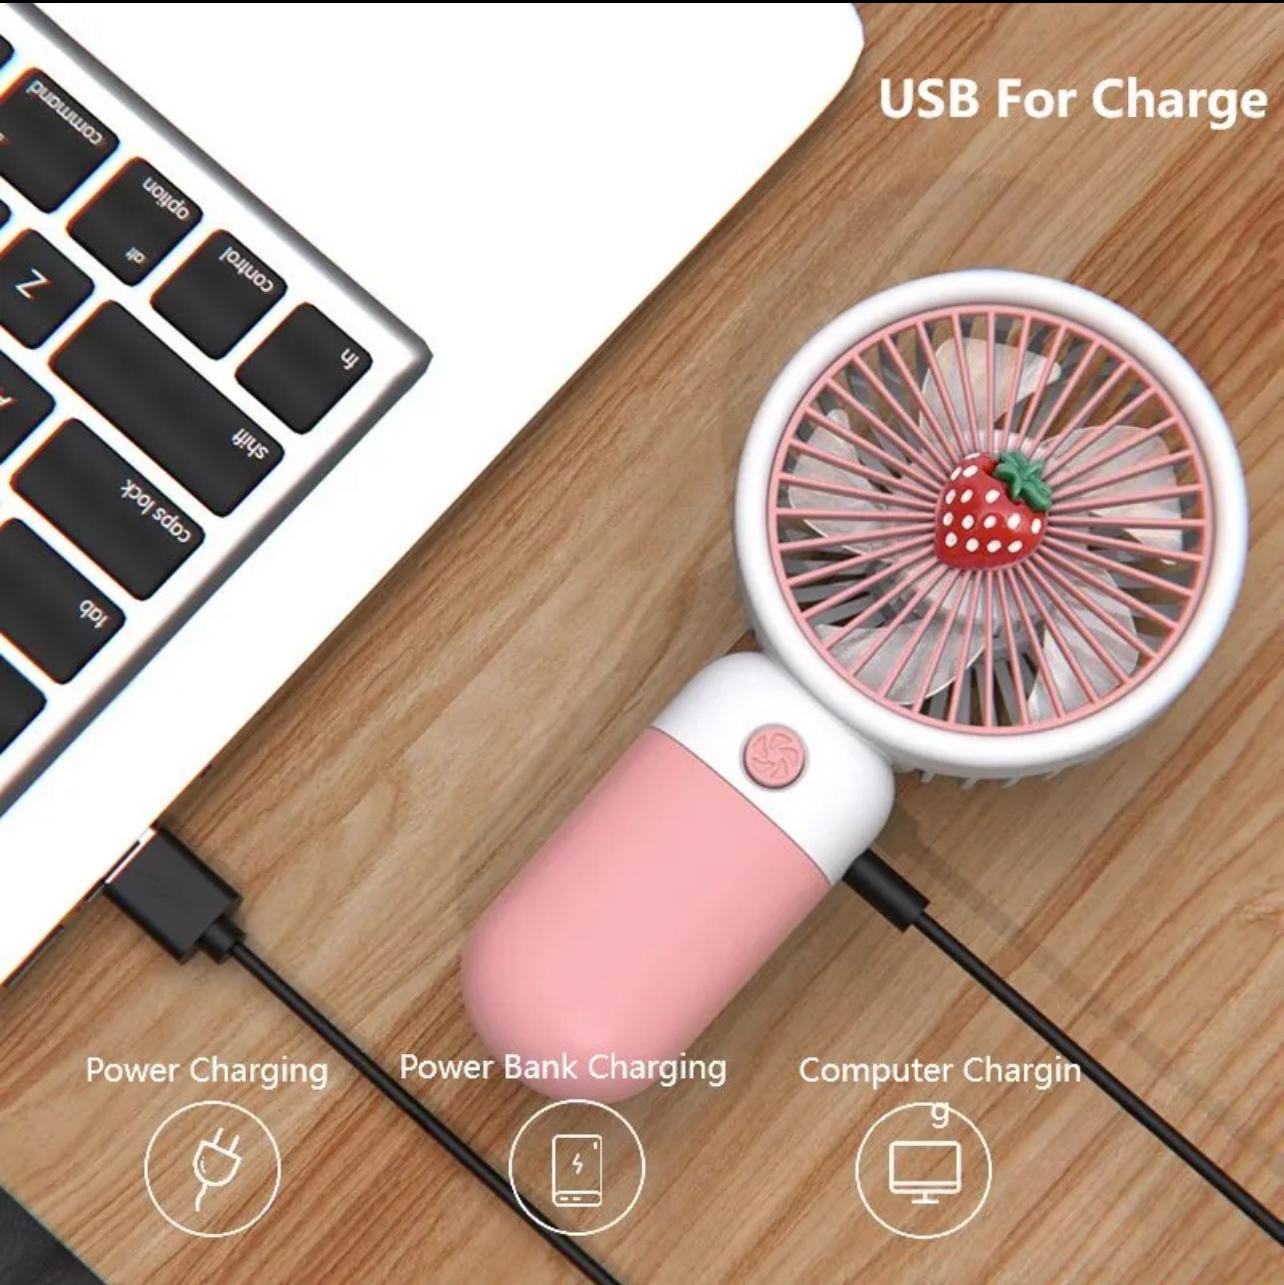 Convenient and ultra-quiet USB mini handheld wind power fan with portable phone holder student office small cooling fans